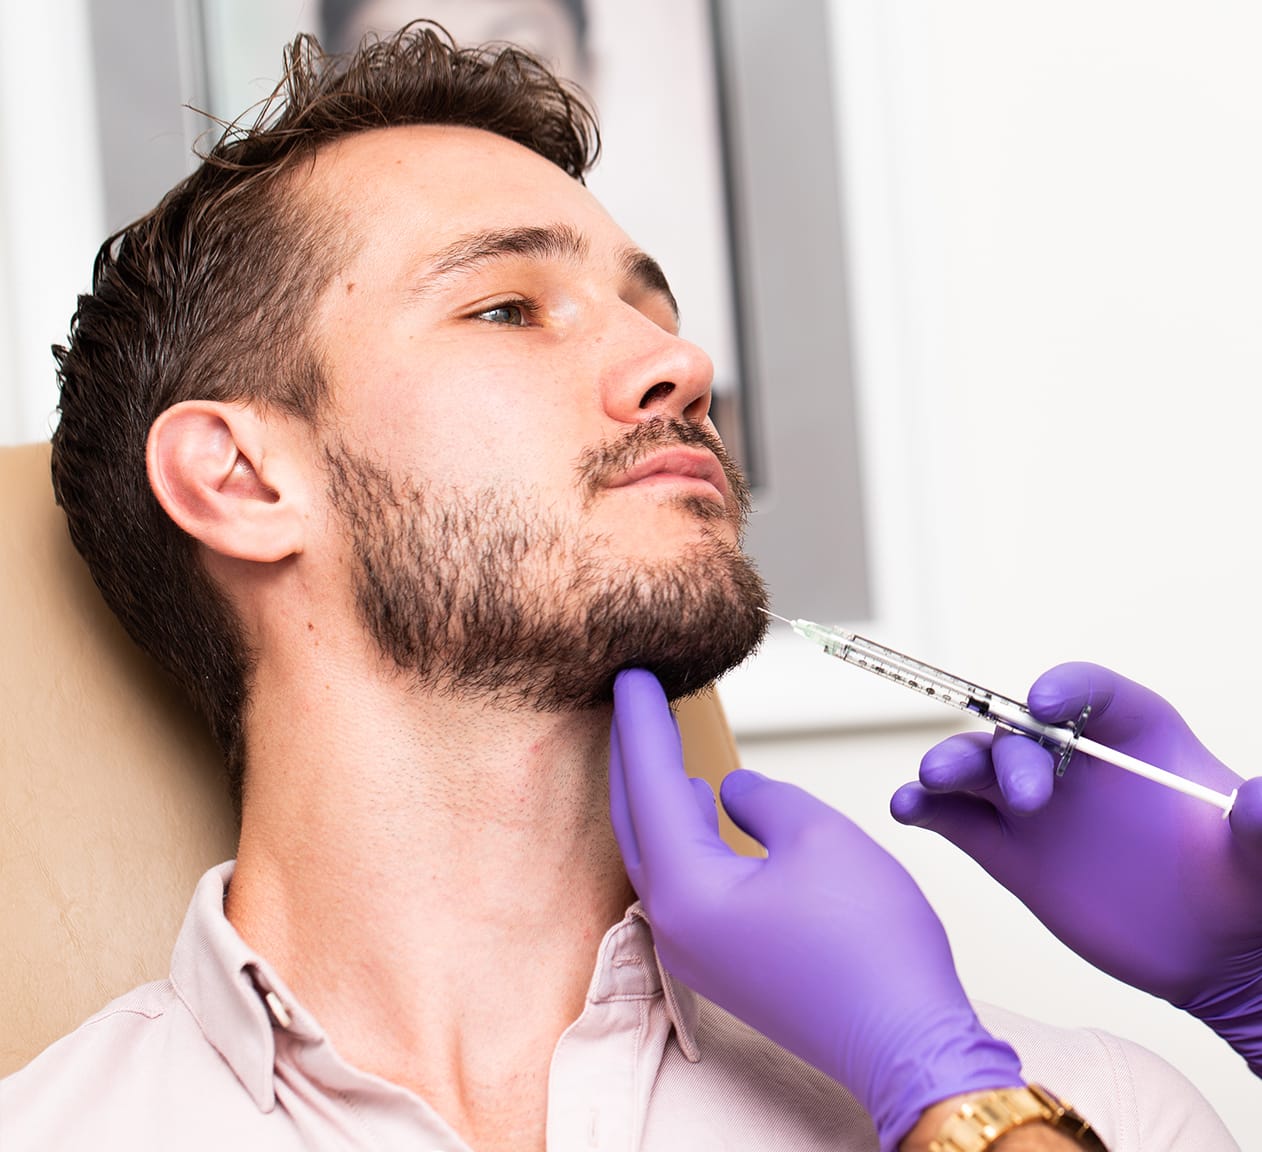 man receiving botox injections in the chin